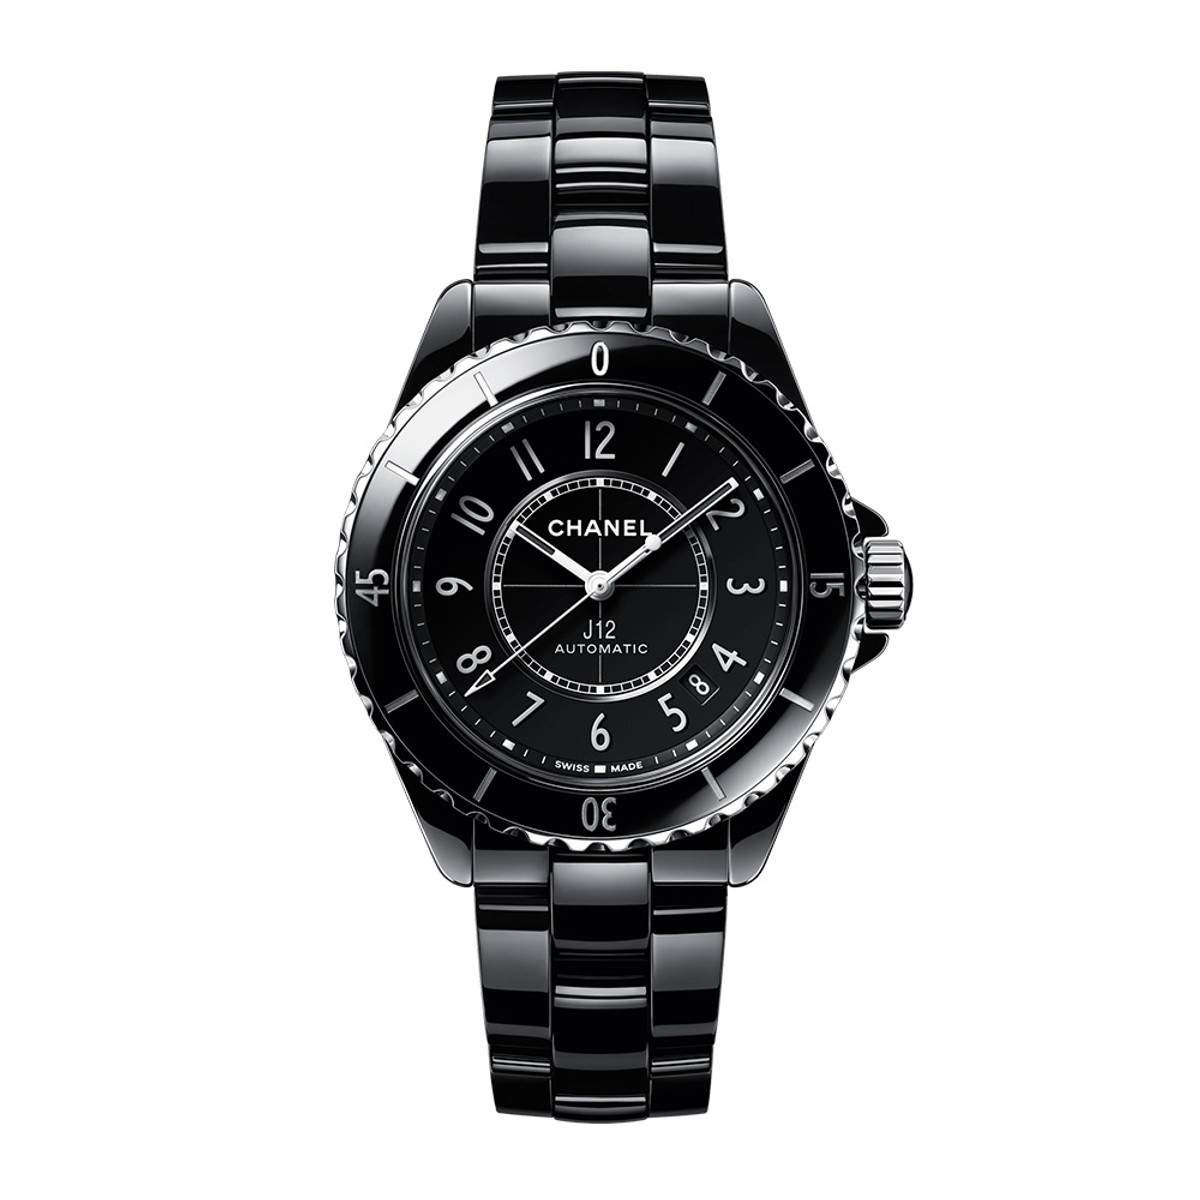 CHANEL J12 WATCH CALIBER 12.1, 38 MM-WCHNL0219 Product Image